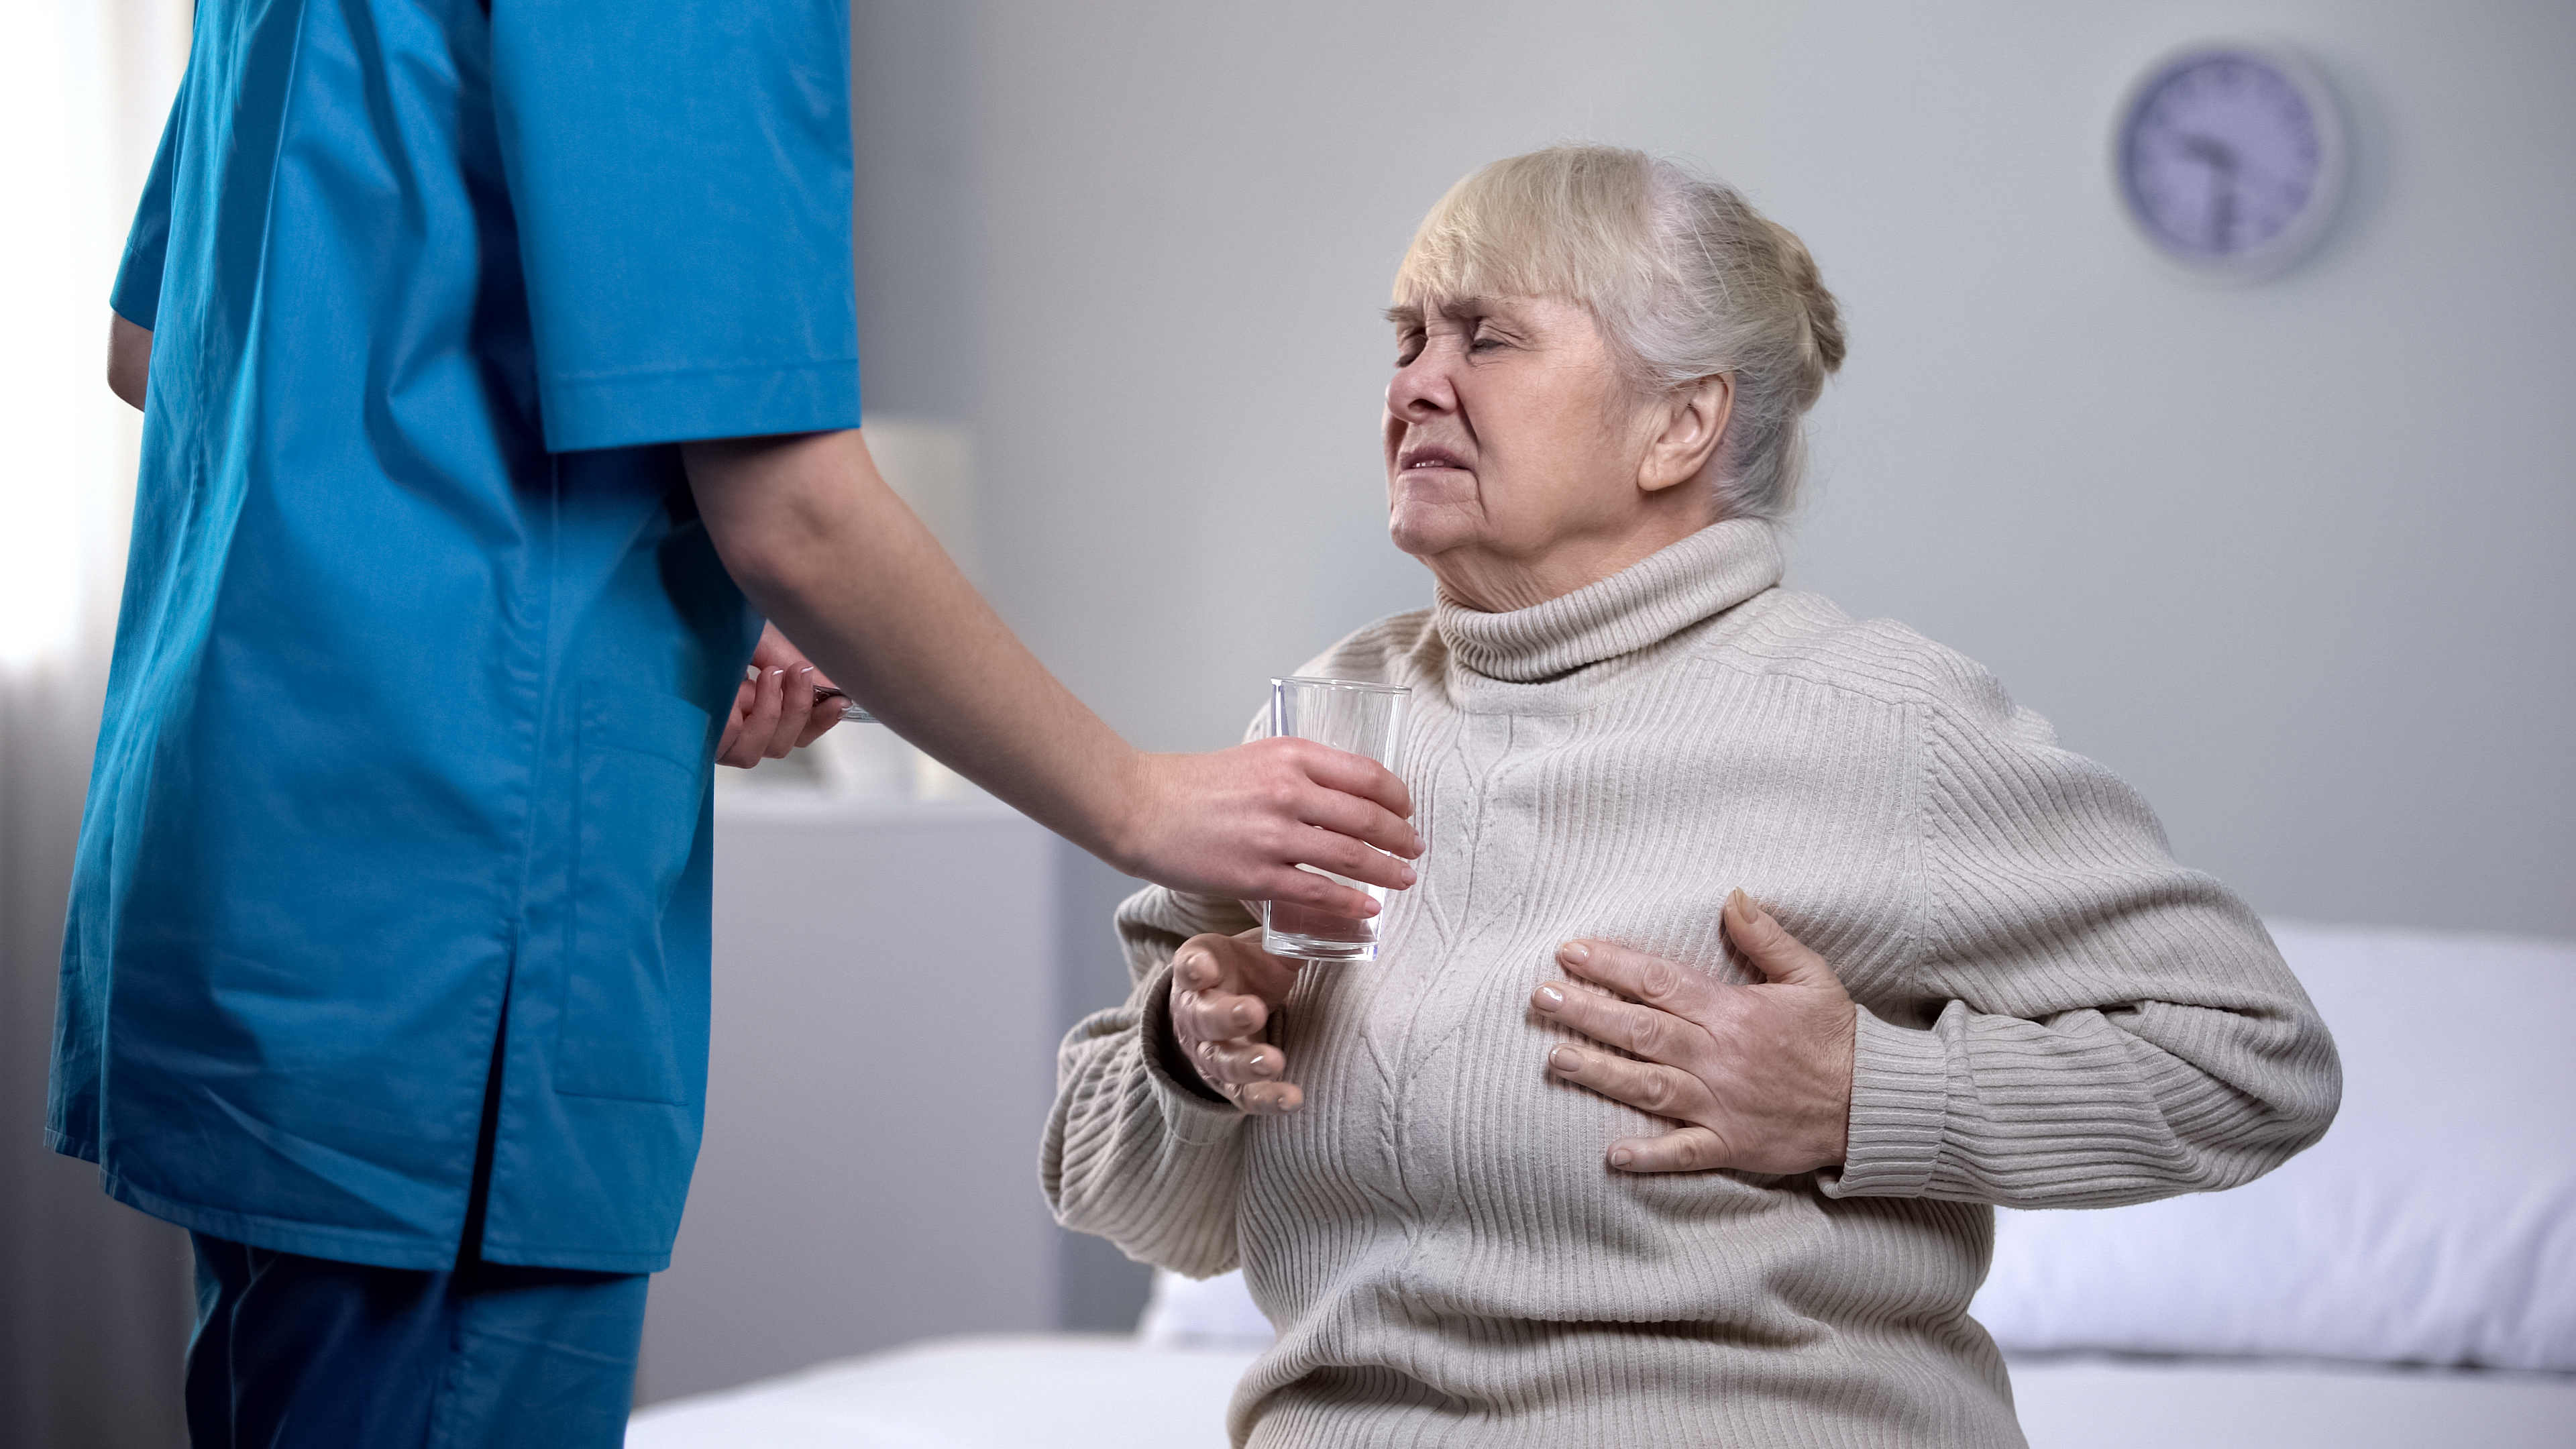 The grandmother suffered a heart attack after finding out that everyone knew her secret. | Source: Shutterstock